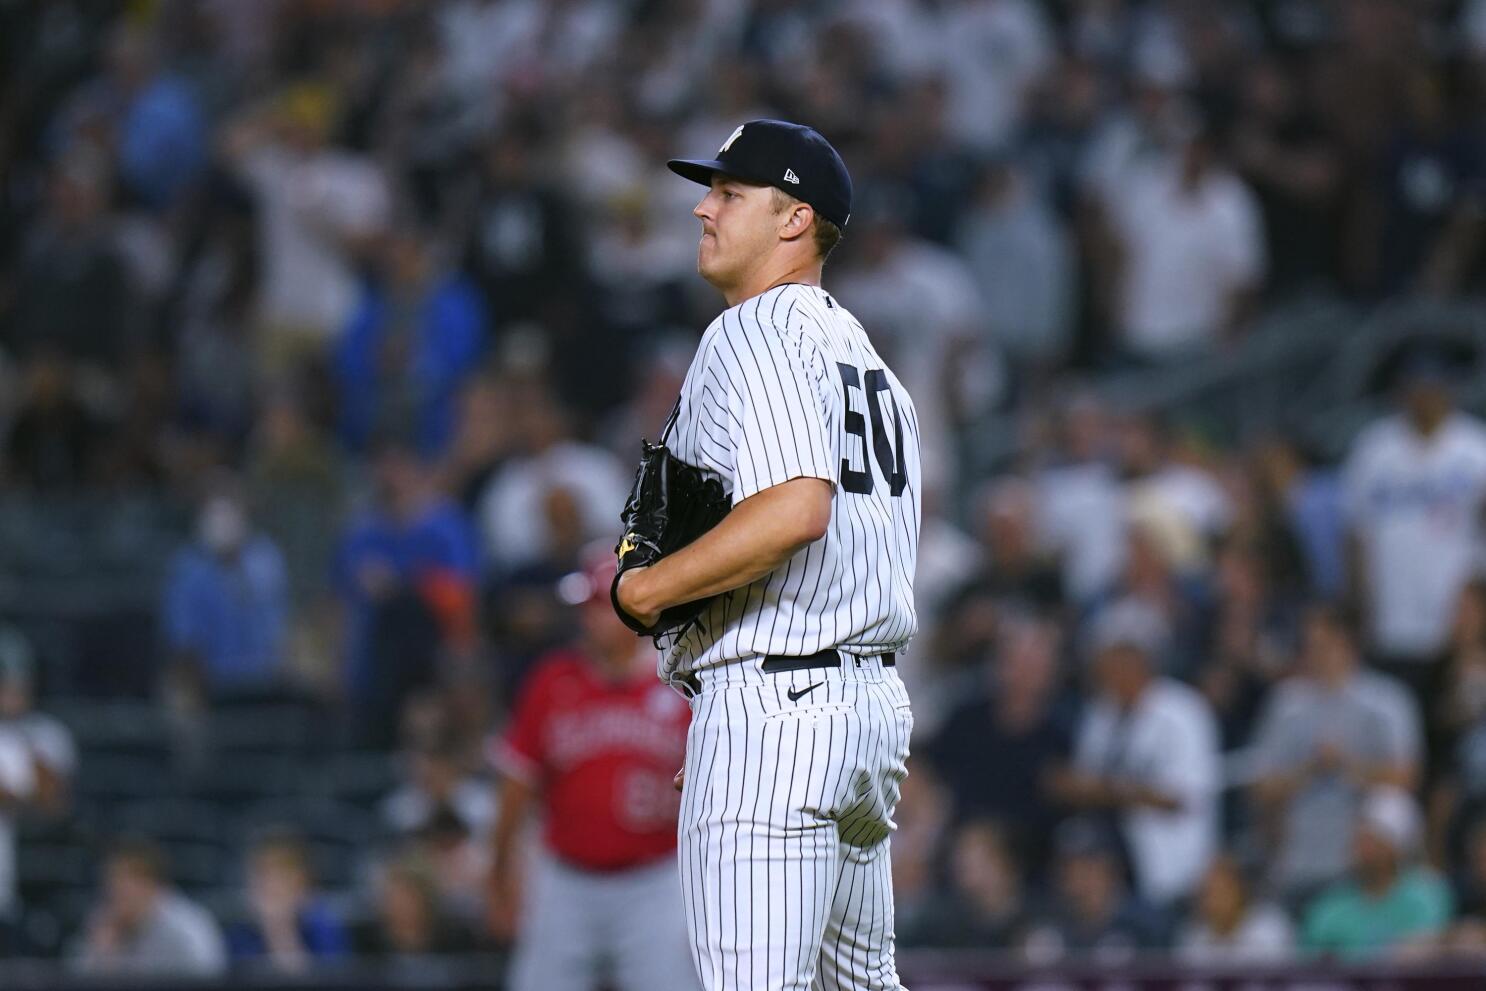 Taillon nears perfection in Yankees' 2nd win over Angels